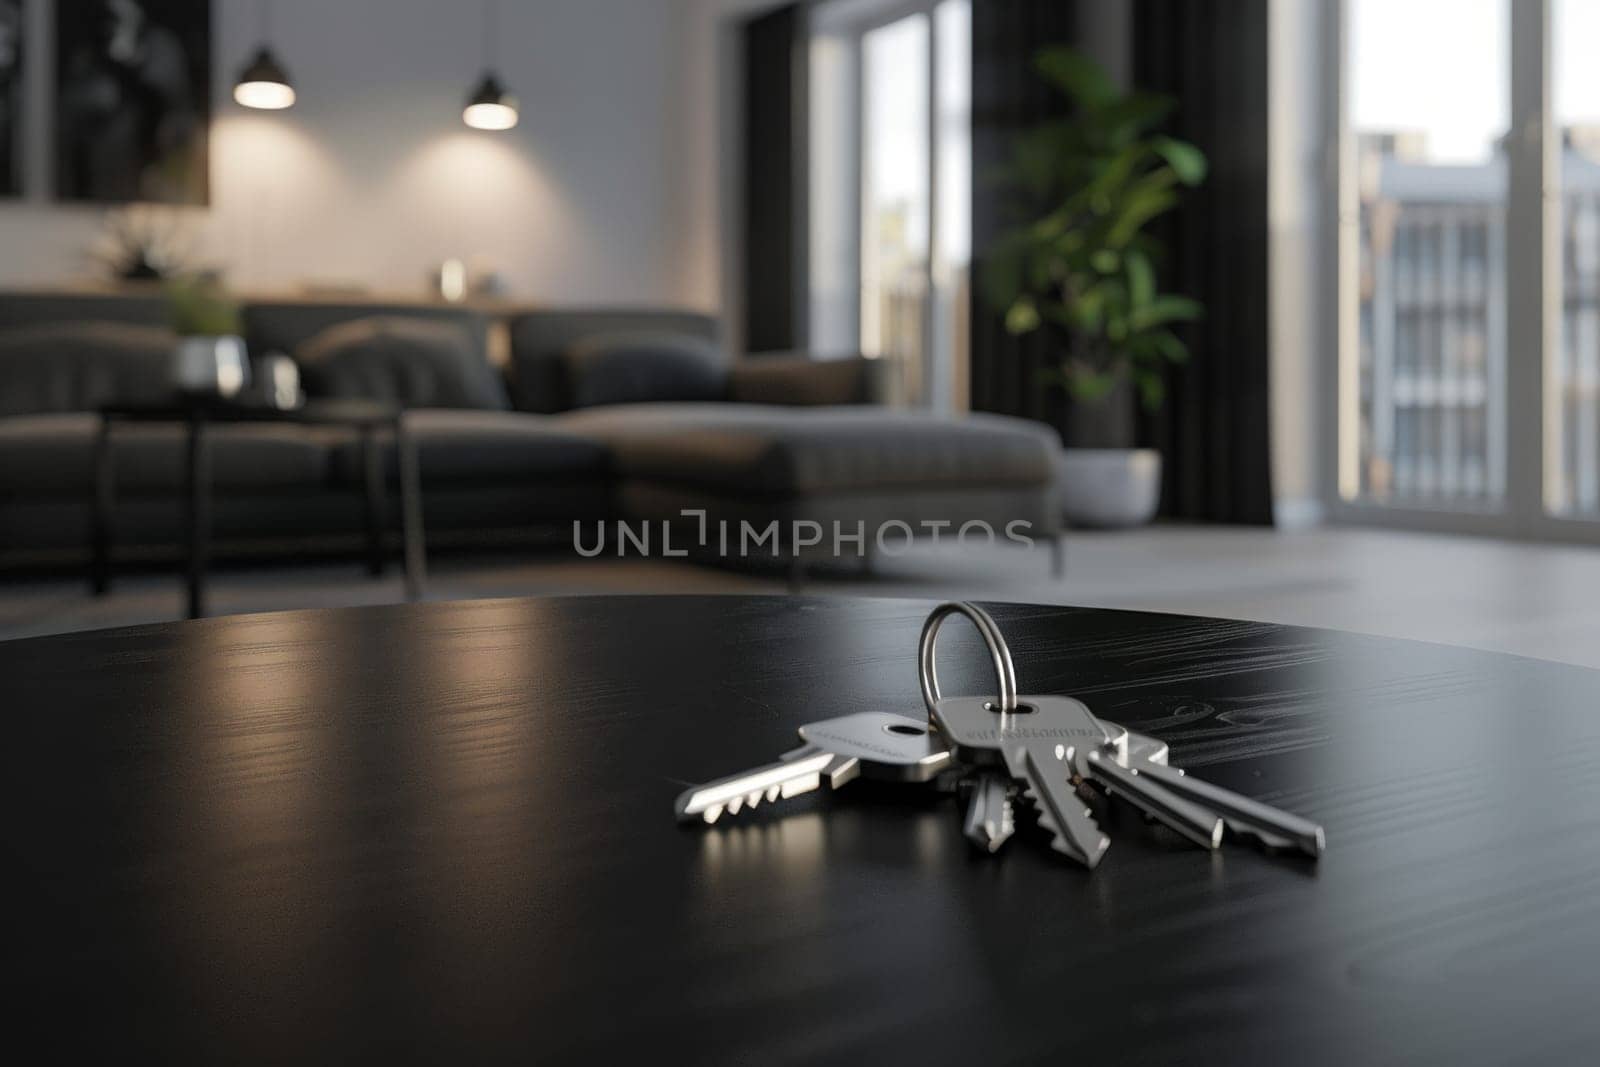 Keys on the table in new apartment or hotel room. Mortgage, investment, rent, real estate, property concept.